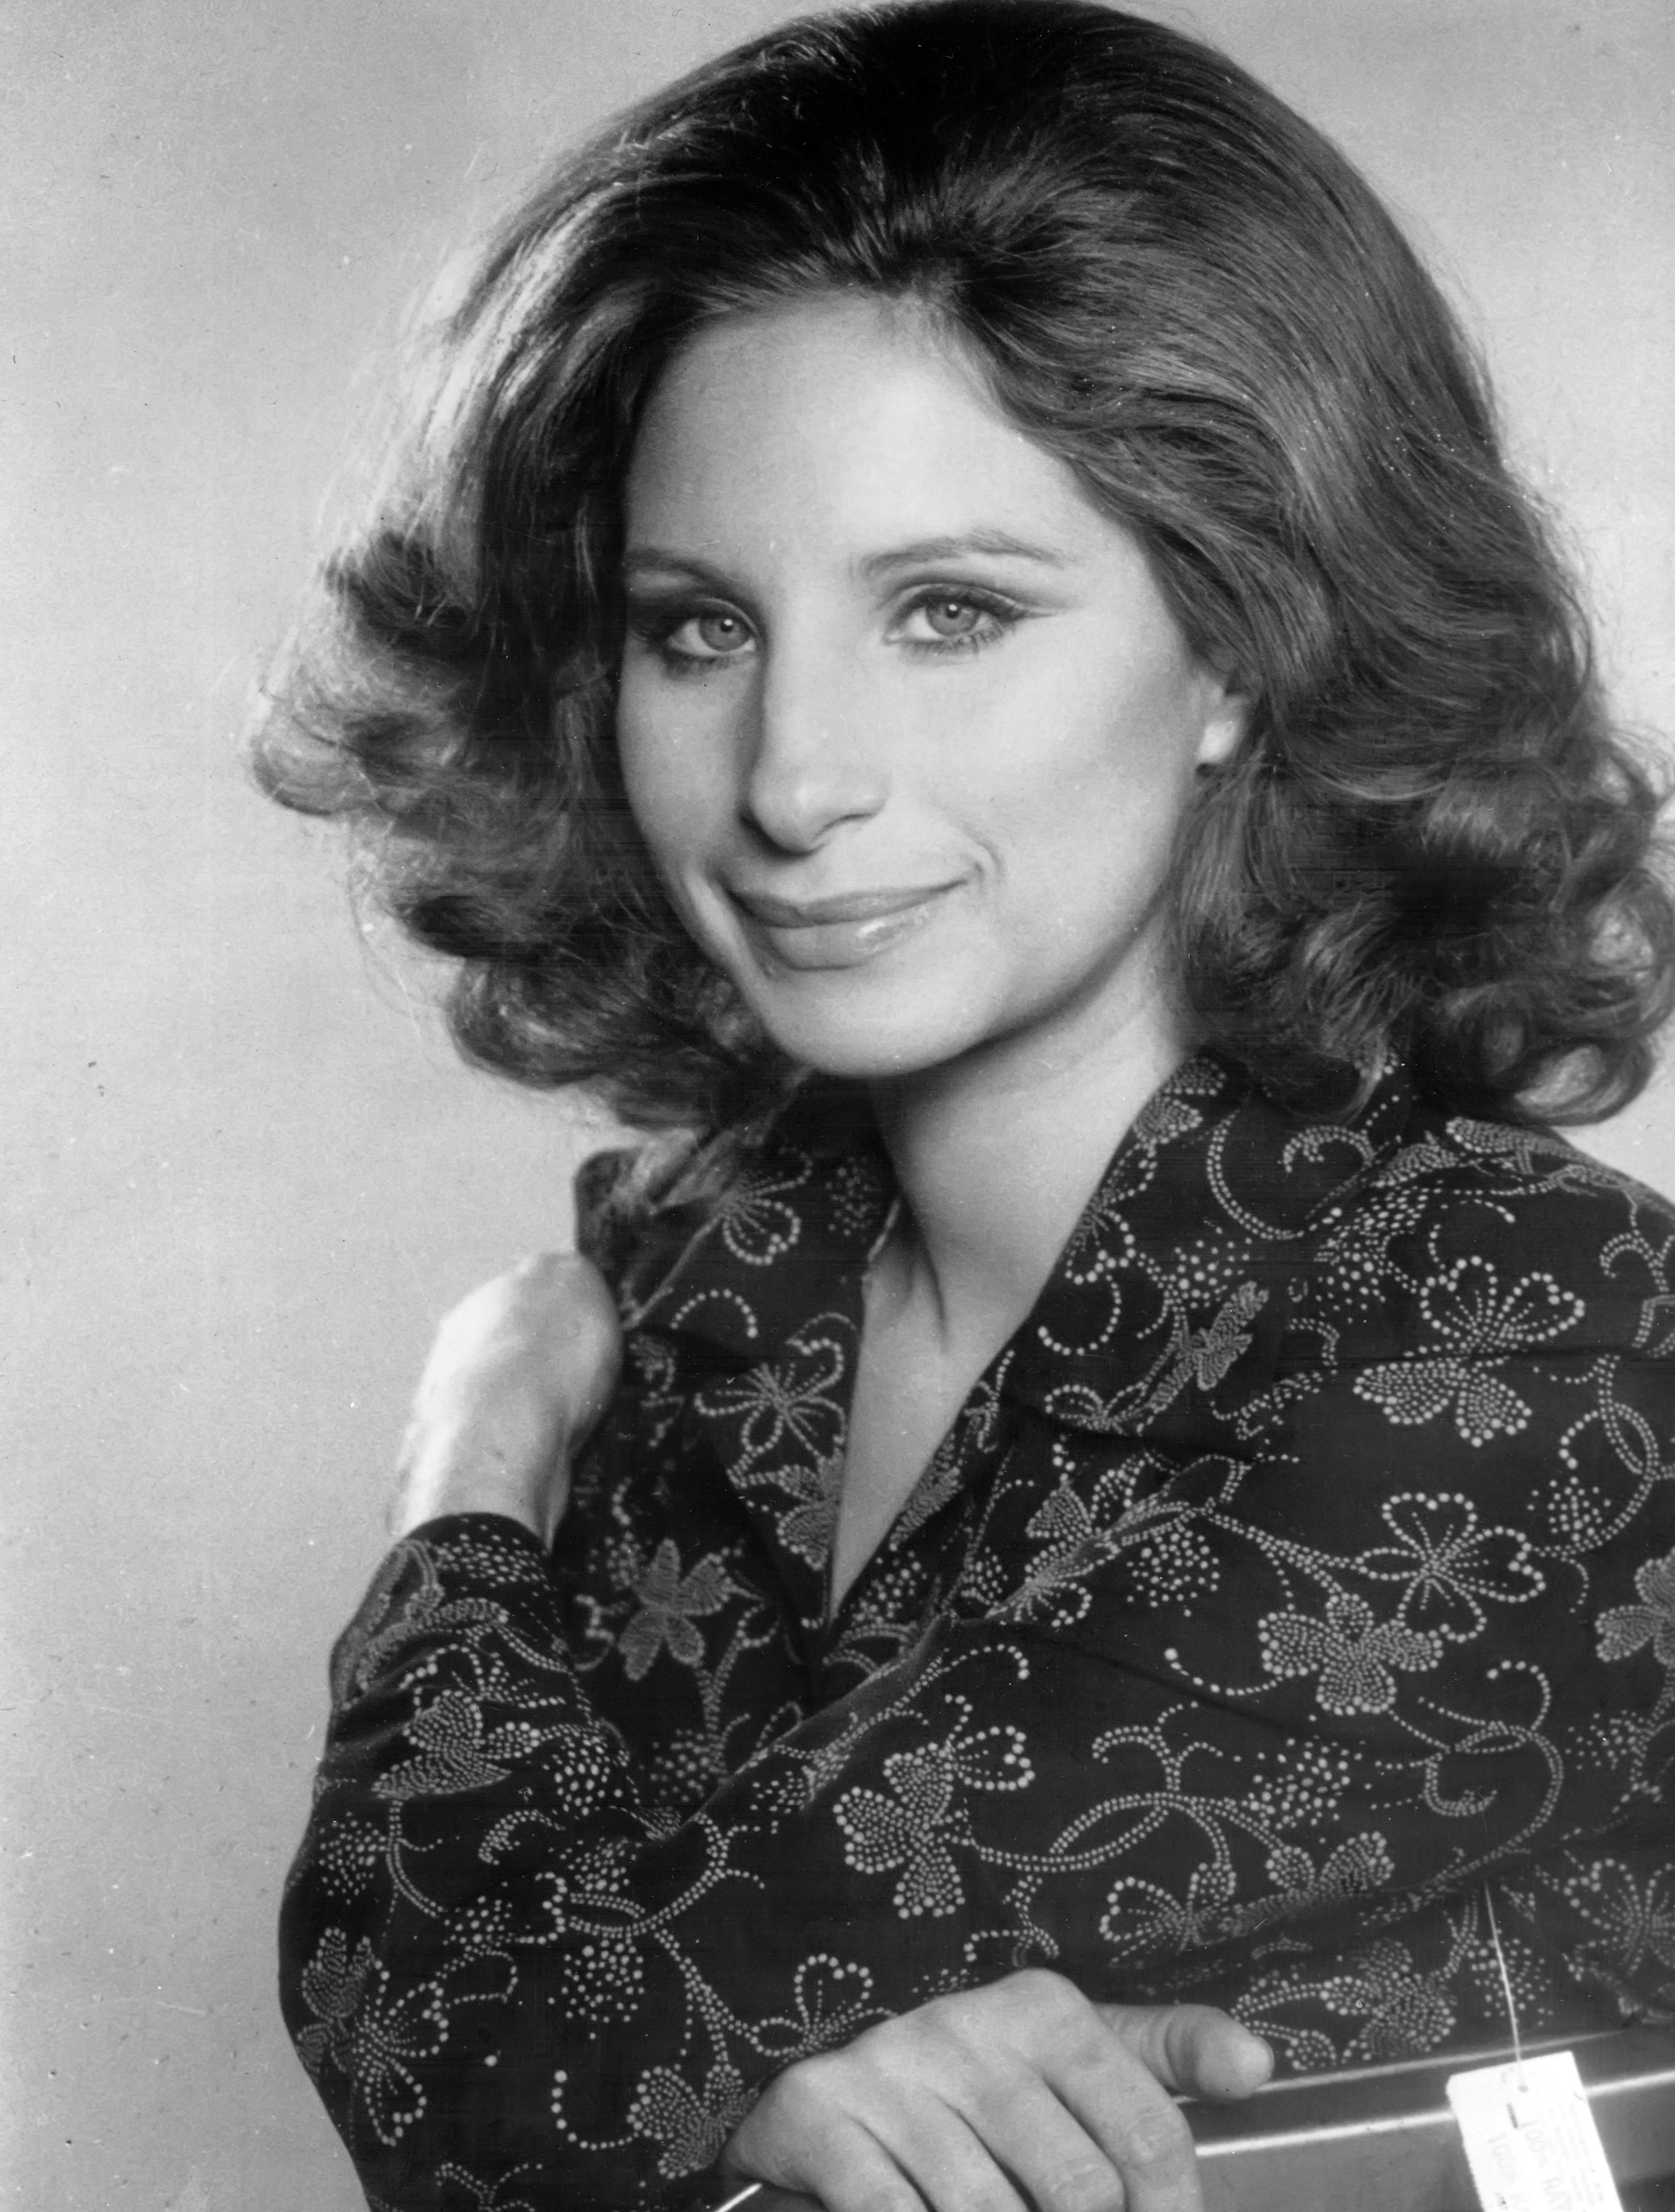 Us actress and singer, Barbra Streisand in New York. Circa 1980 | Source: Getty Images